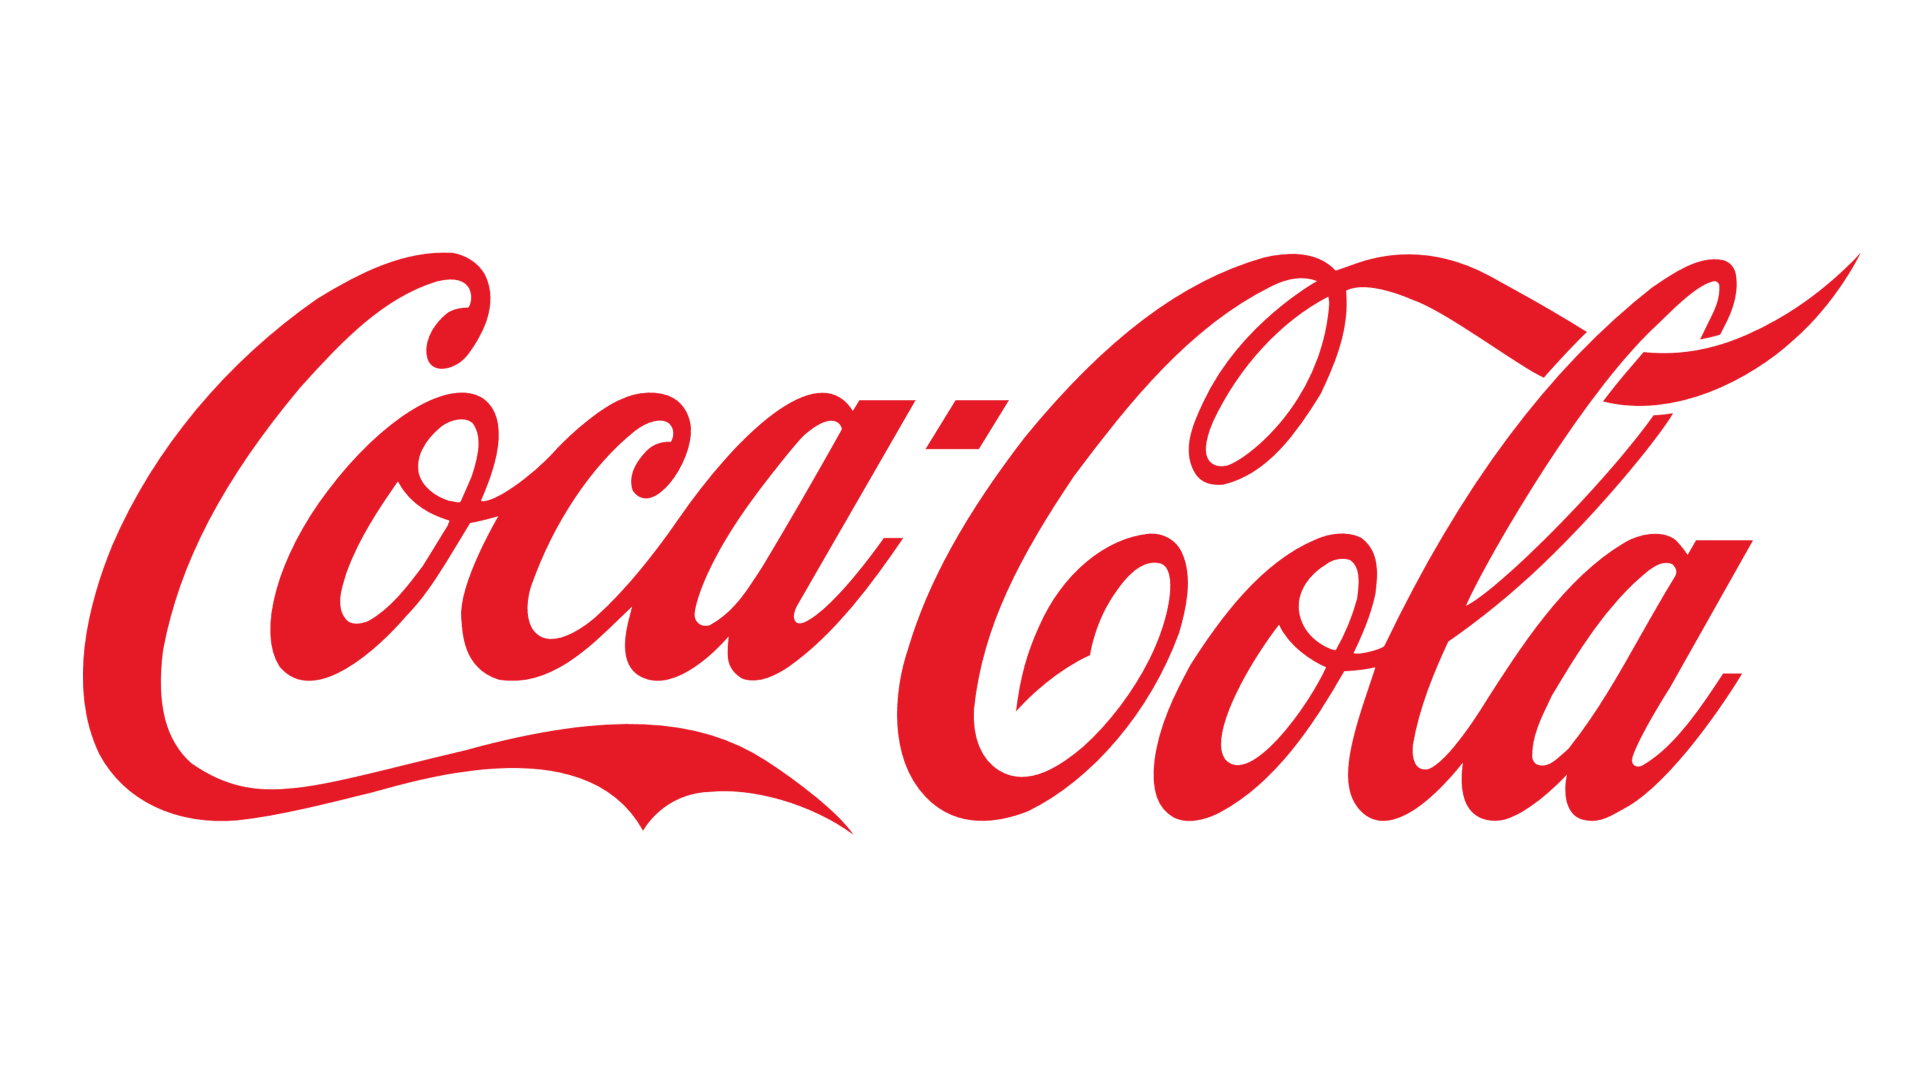 Coca cola logo for the blog article "What Are the Types of Logo Design?"